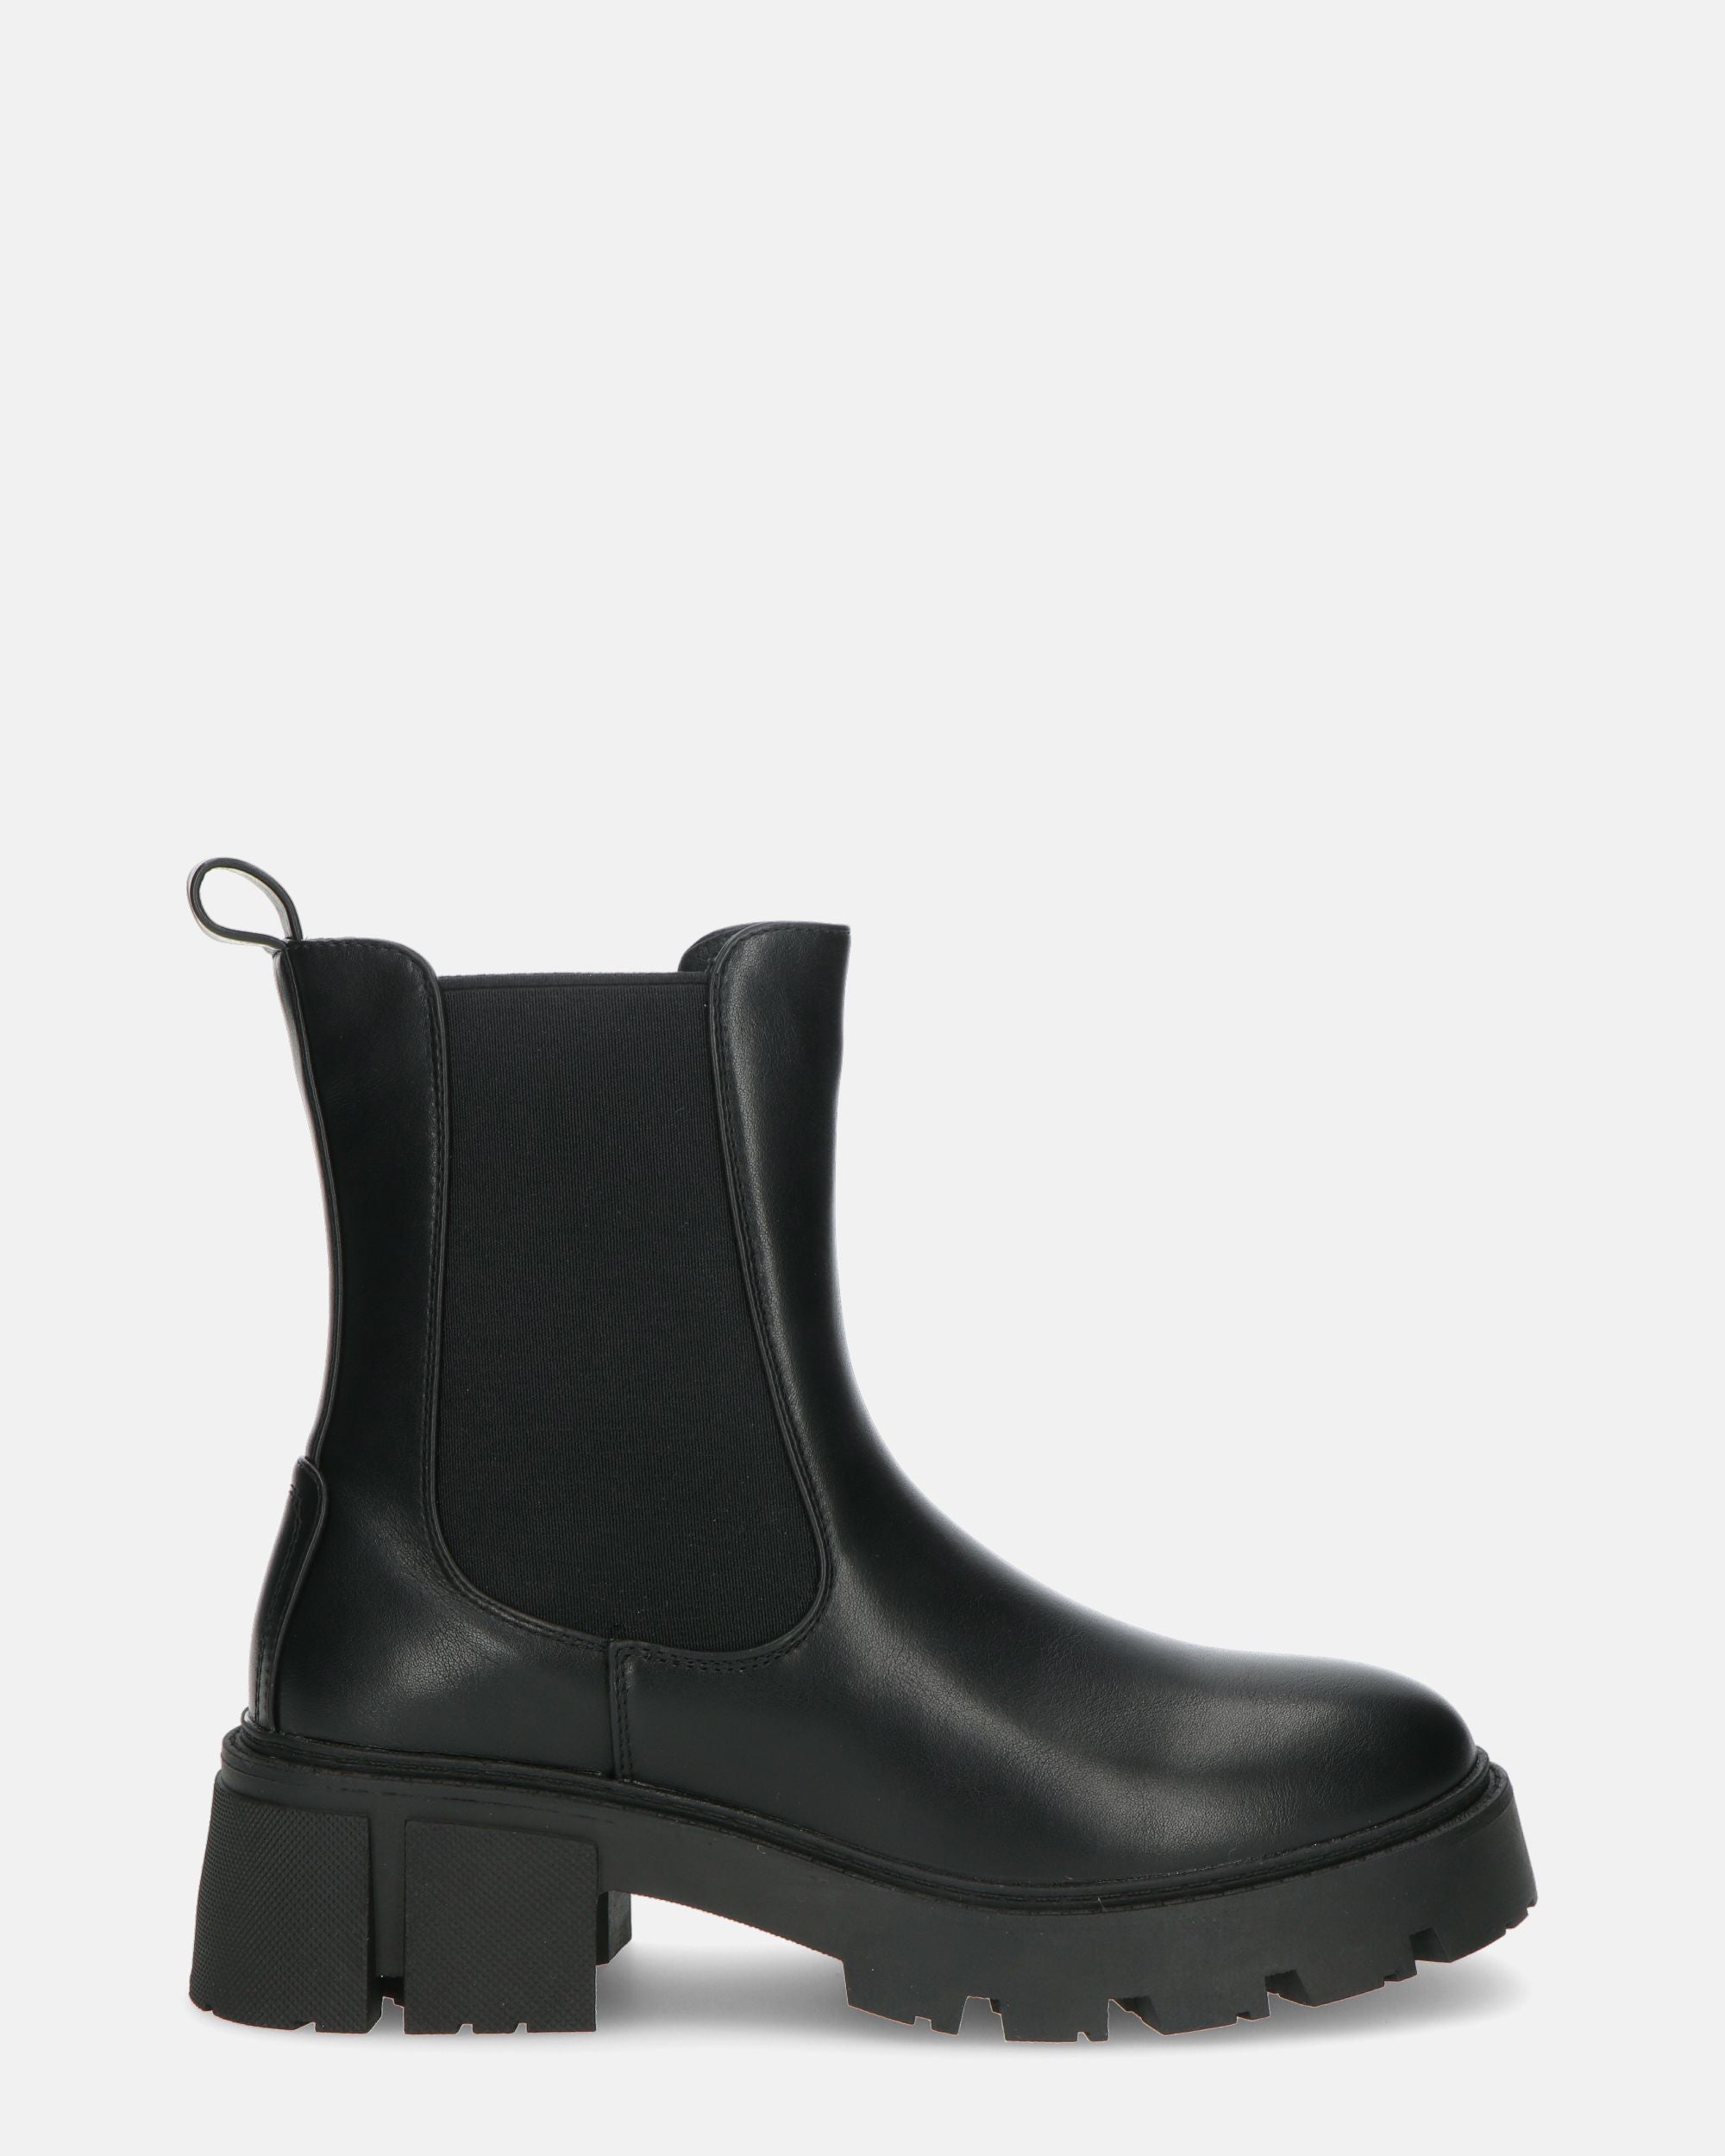 ALLEGRA - black ankle boots with elastic fabric